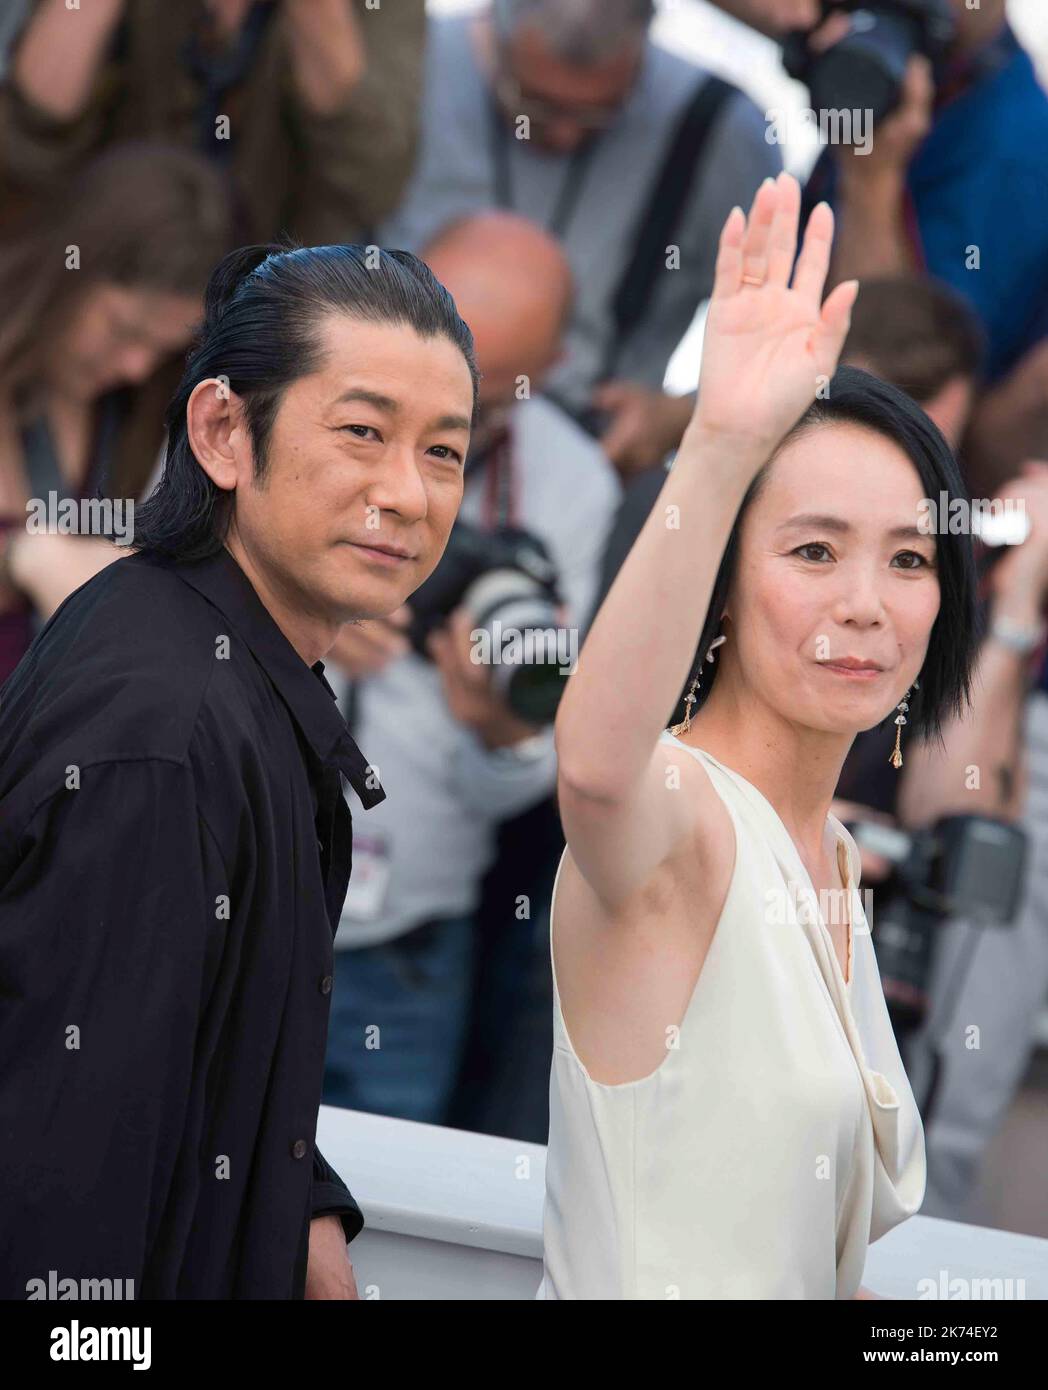 Actors Nagase Masatoshi, Misuzu Kanno and Ayame Misaki attend the 'Hikari (Radiance)' photocall during the 70th annual Cannes Film Festival at Palais des Festivals Stock Photo